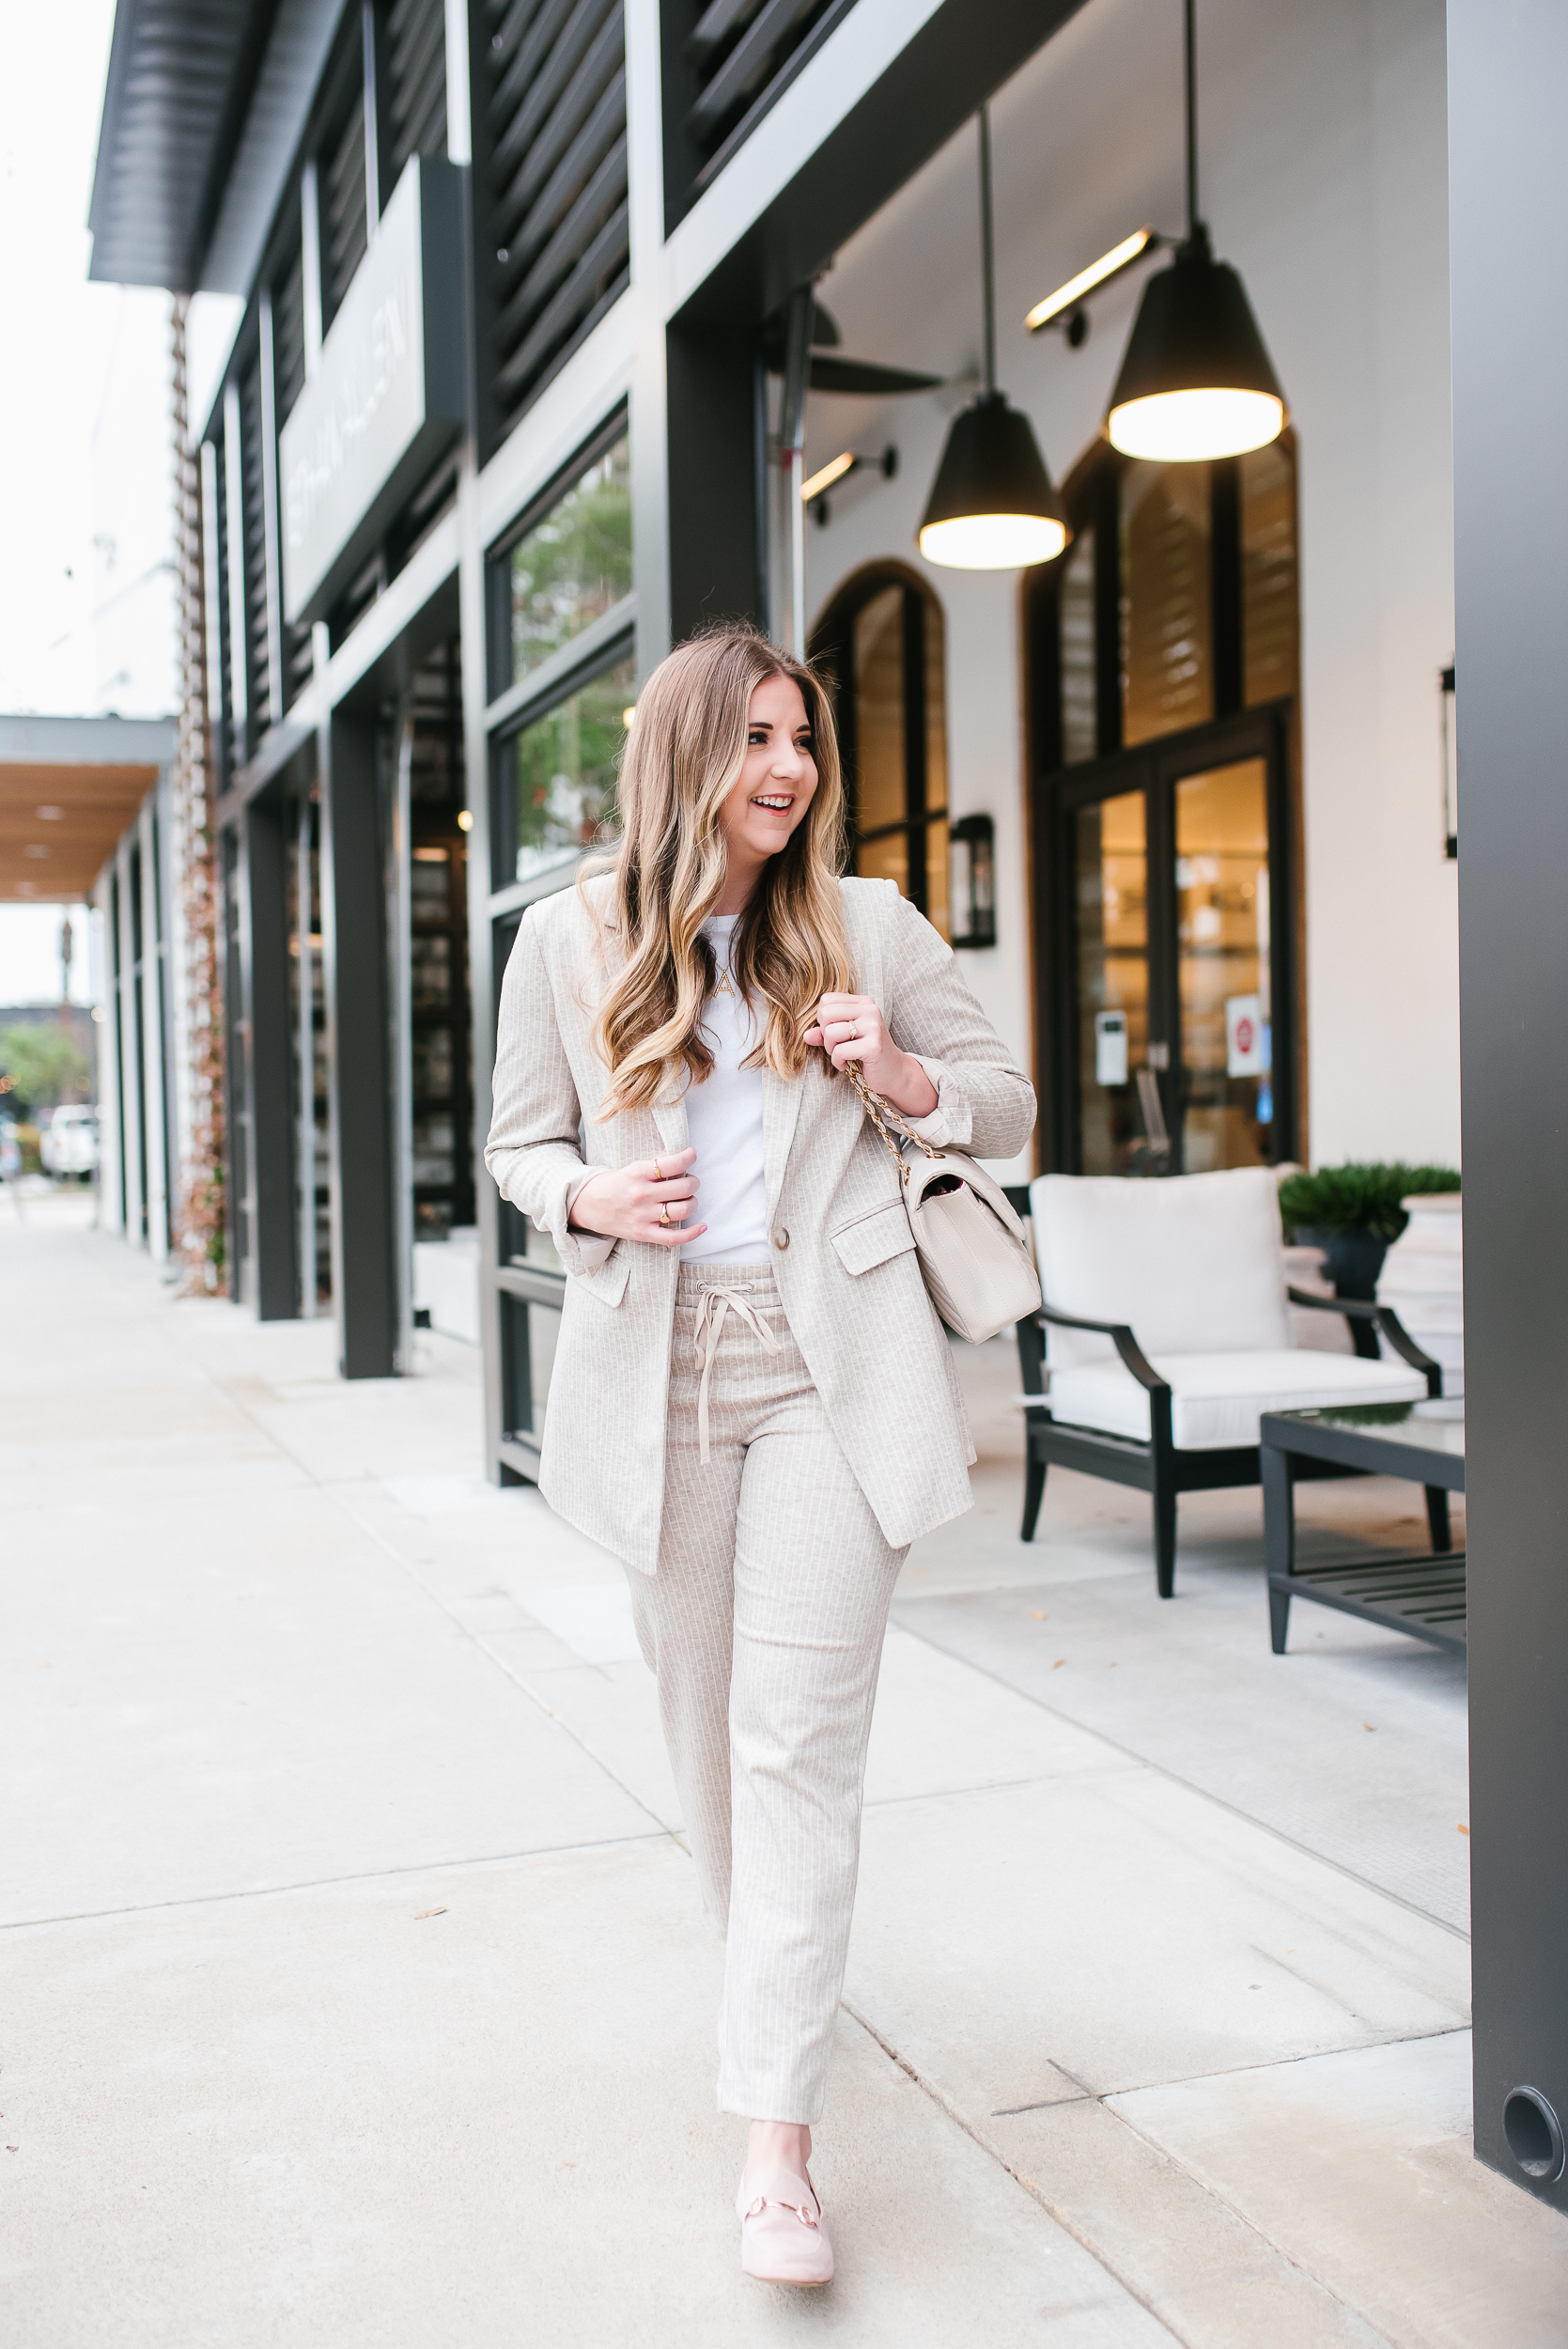 Spring Business Casual Outfit Inspiration - Thrifty Pineapple